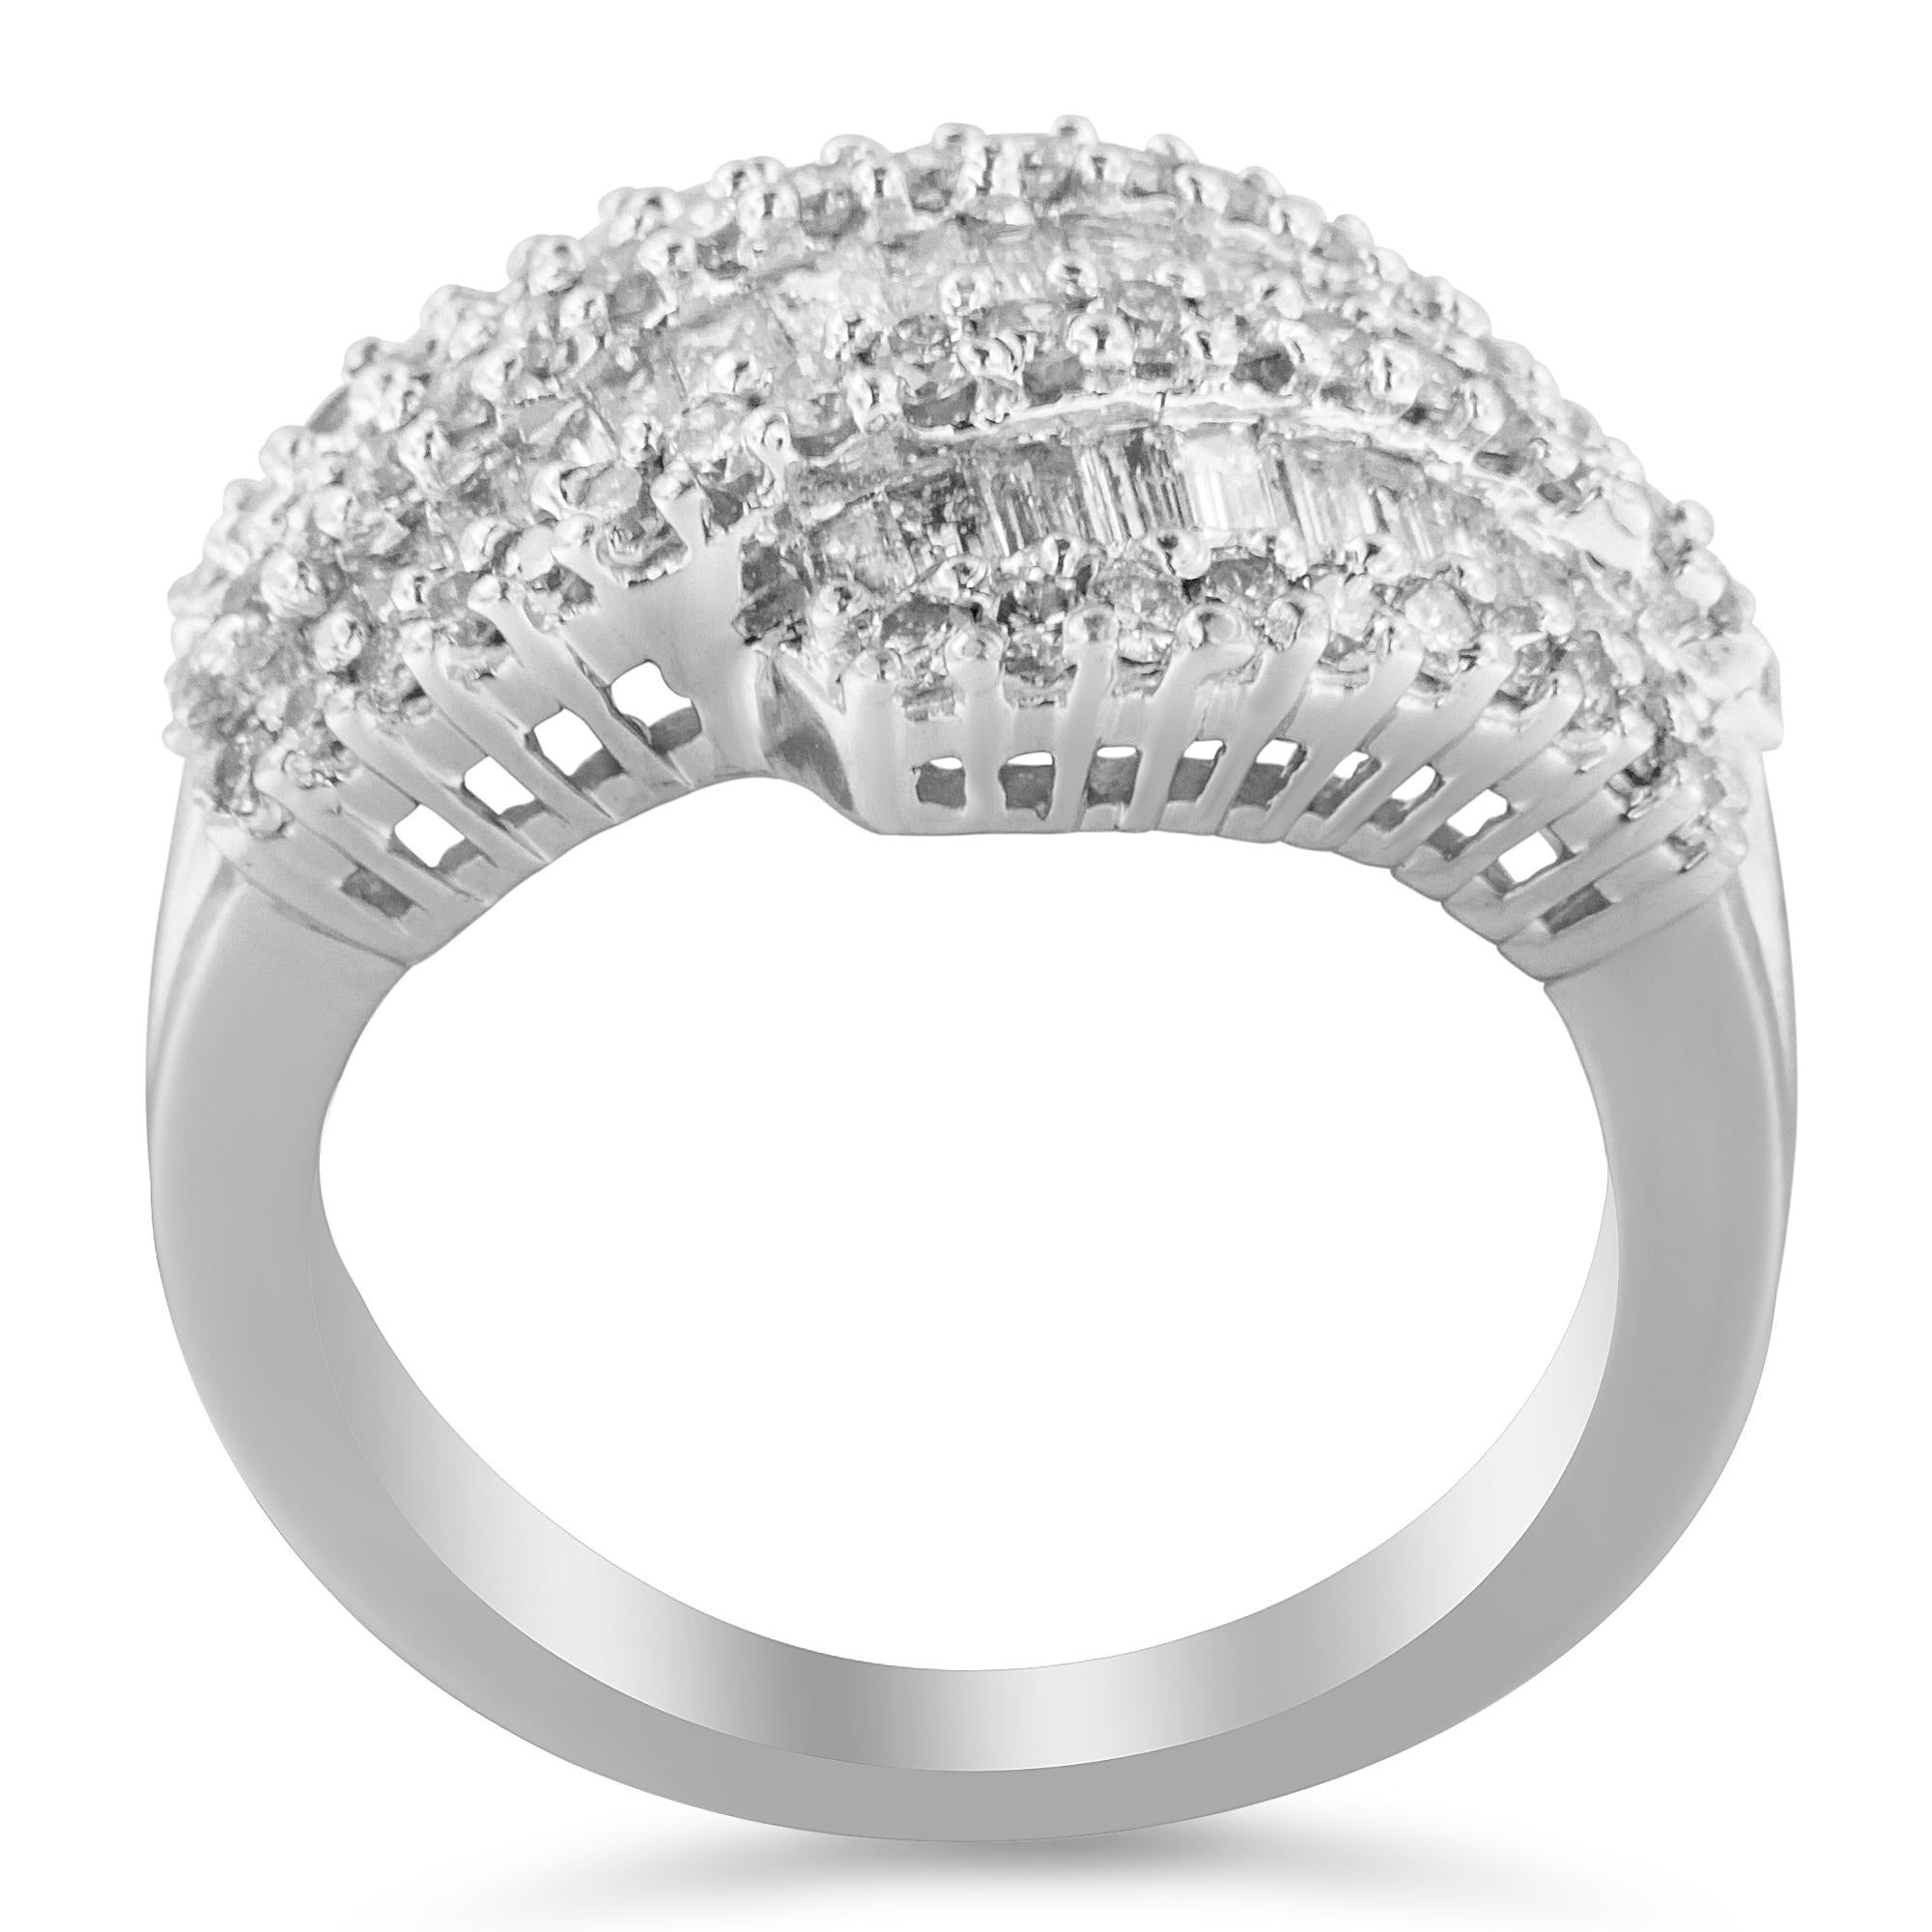 For Sale:  14K White Gold 1 3/4 Carat Diamond Cocktail Ring Band 2